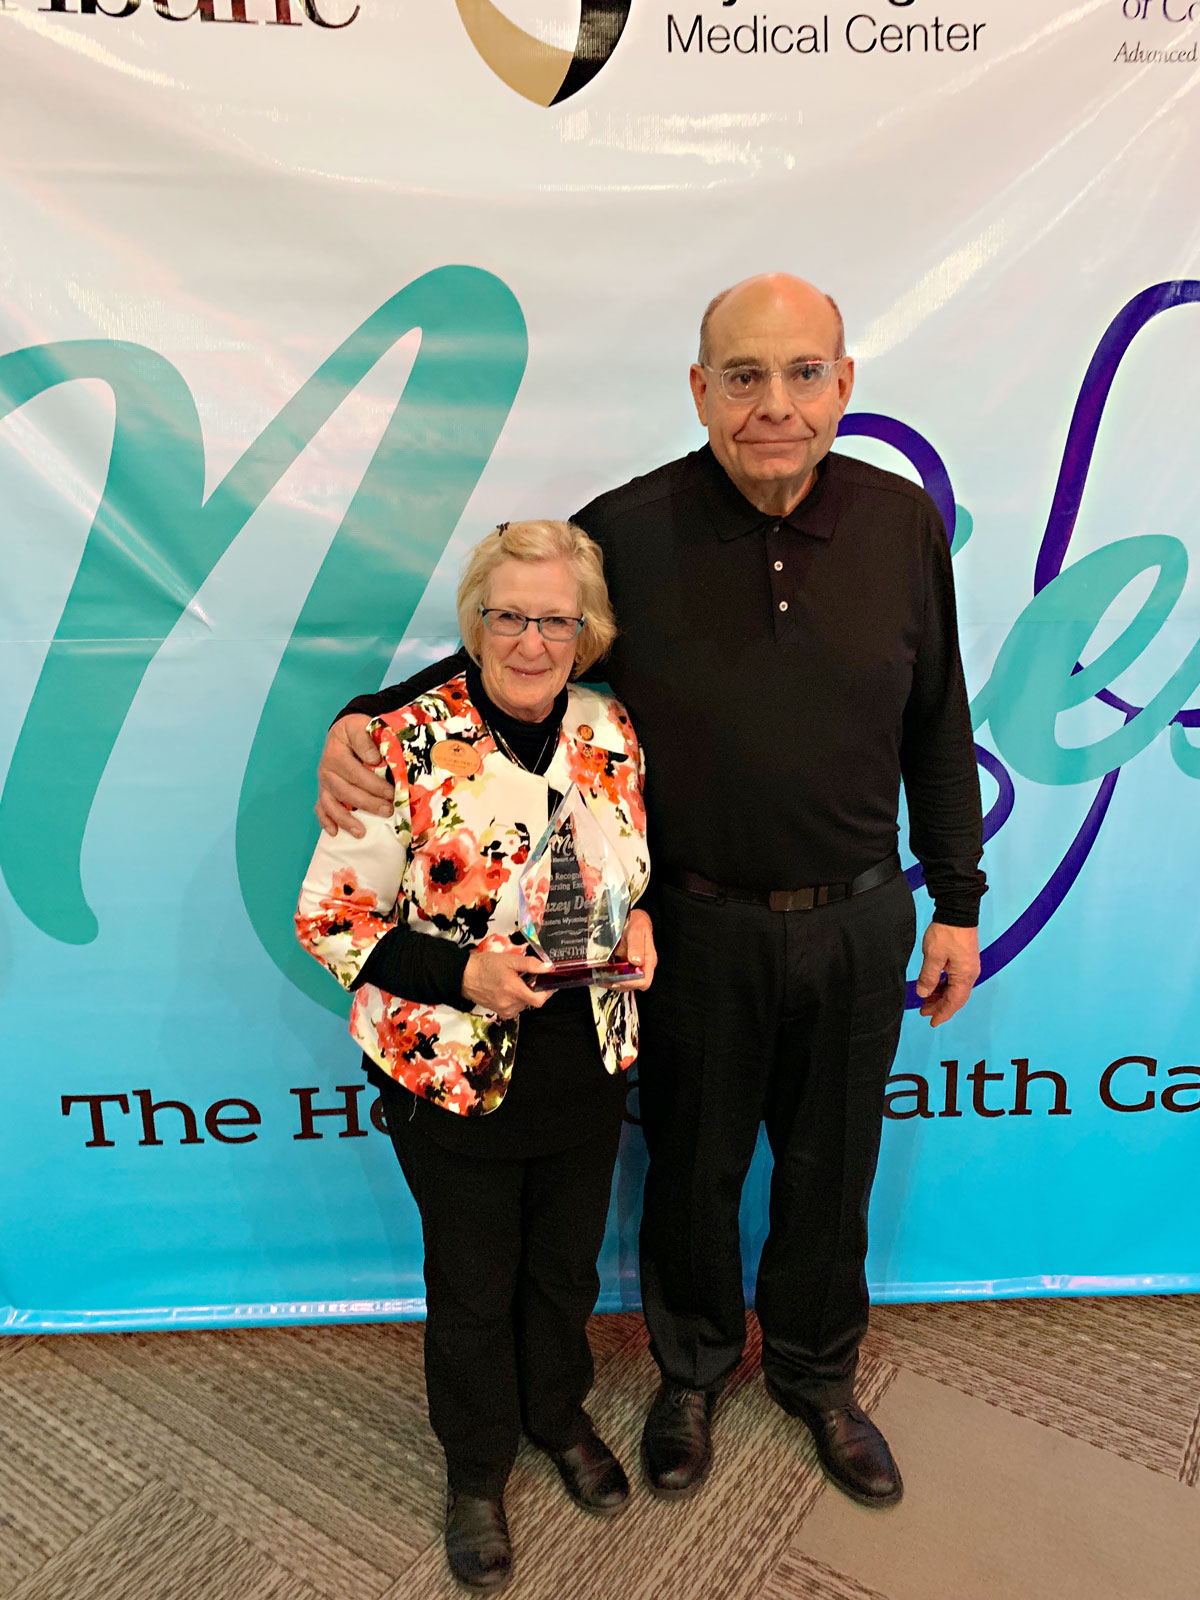 Suzey Delger and her husband Stephen at the ceremony in Casper where she was recognized as one of Wyoming’s Top 10 Nurses.